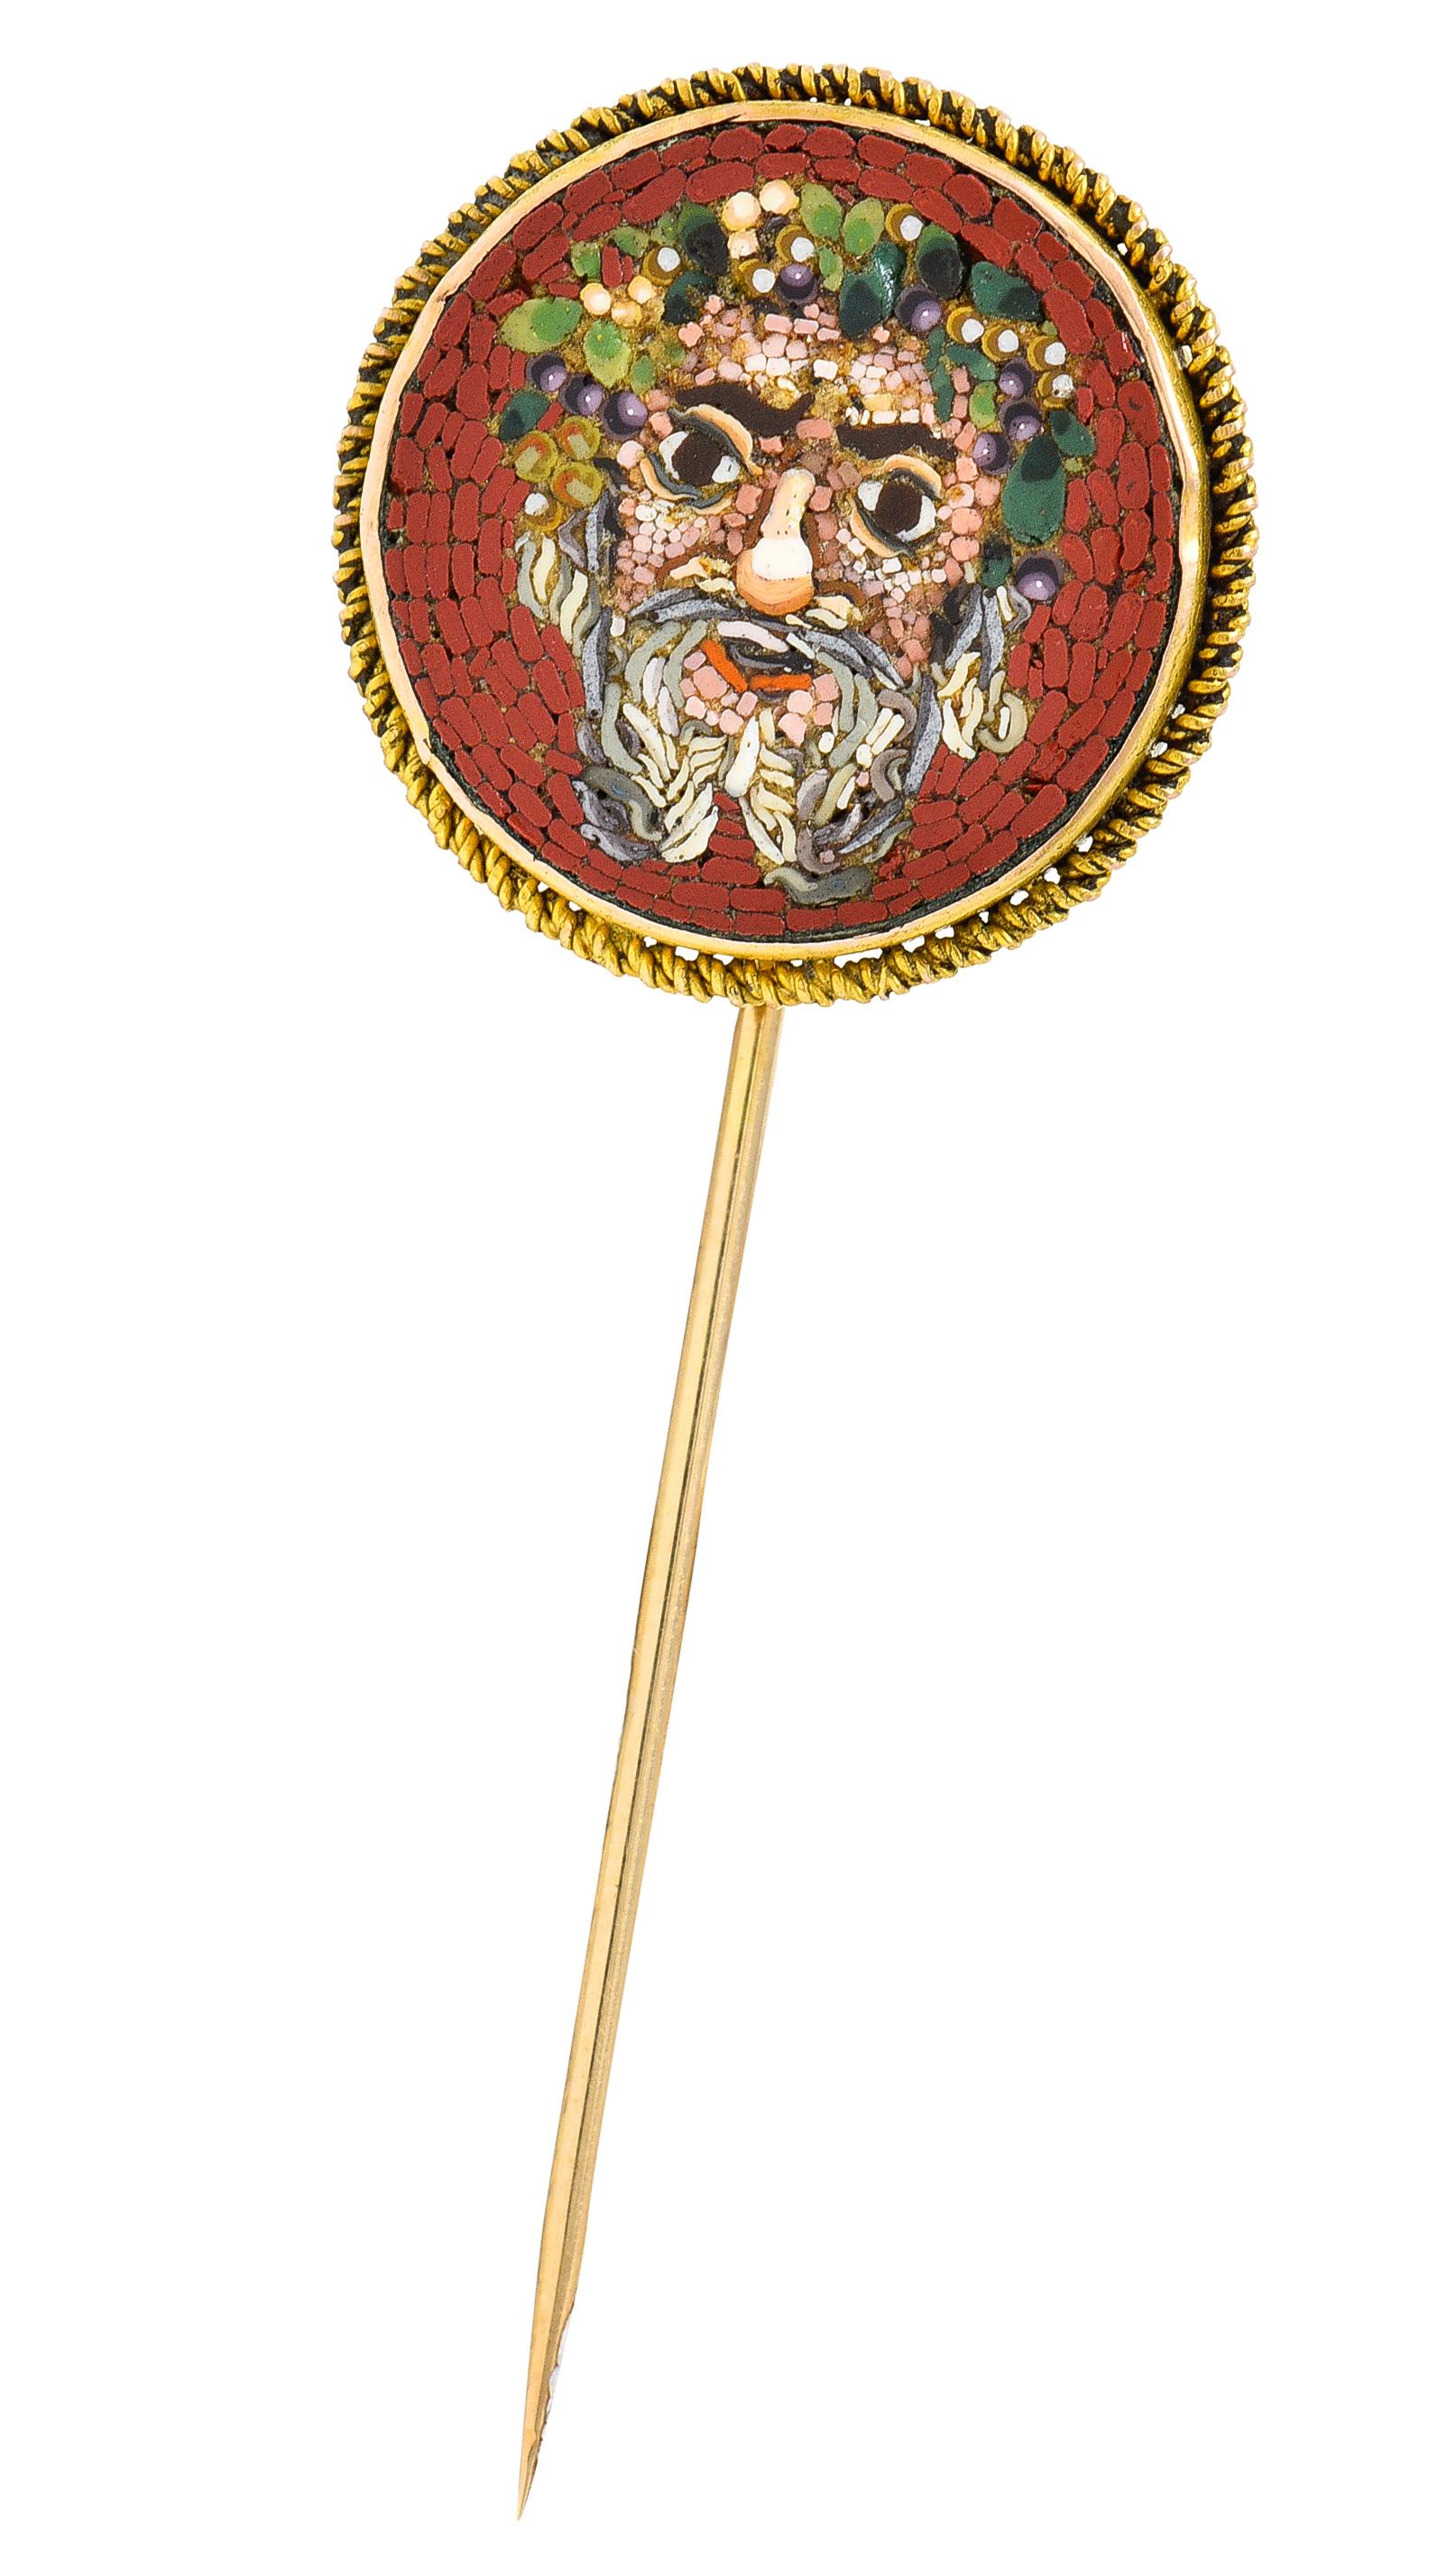 Stickpin centers intricately inlaid hardstone micro-mosaic depicting the head of the god Dionysus

Adorned with grape vine crown on an orangey-red background

Ranging in color with green, purple, peach, and gray - quality consistent with age

With